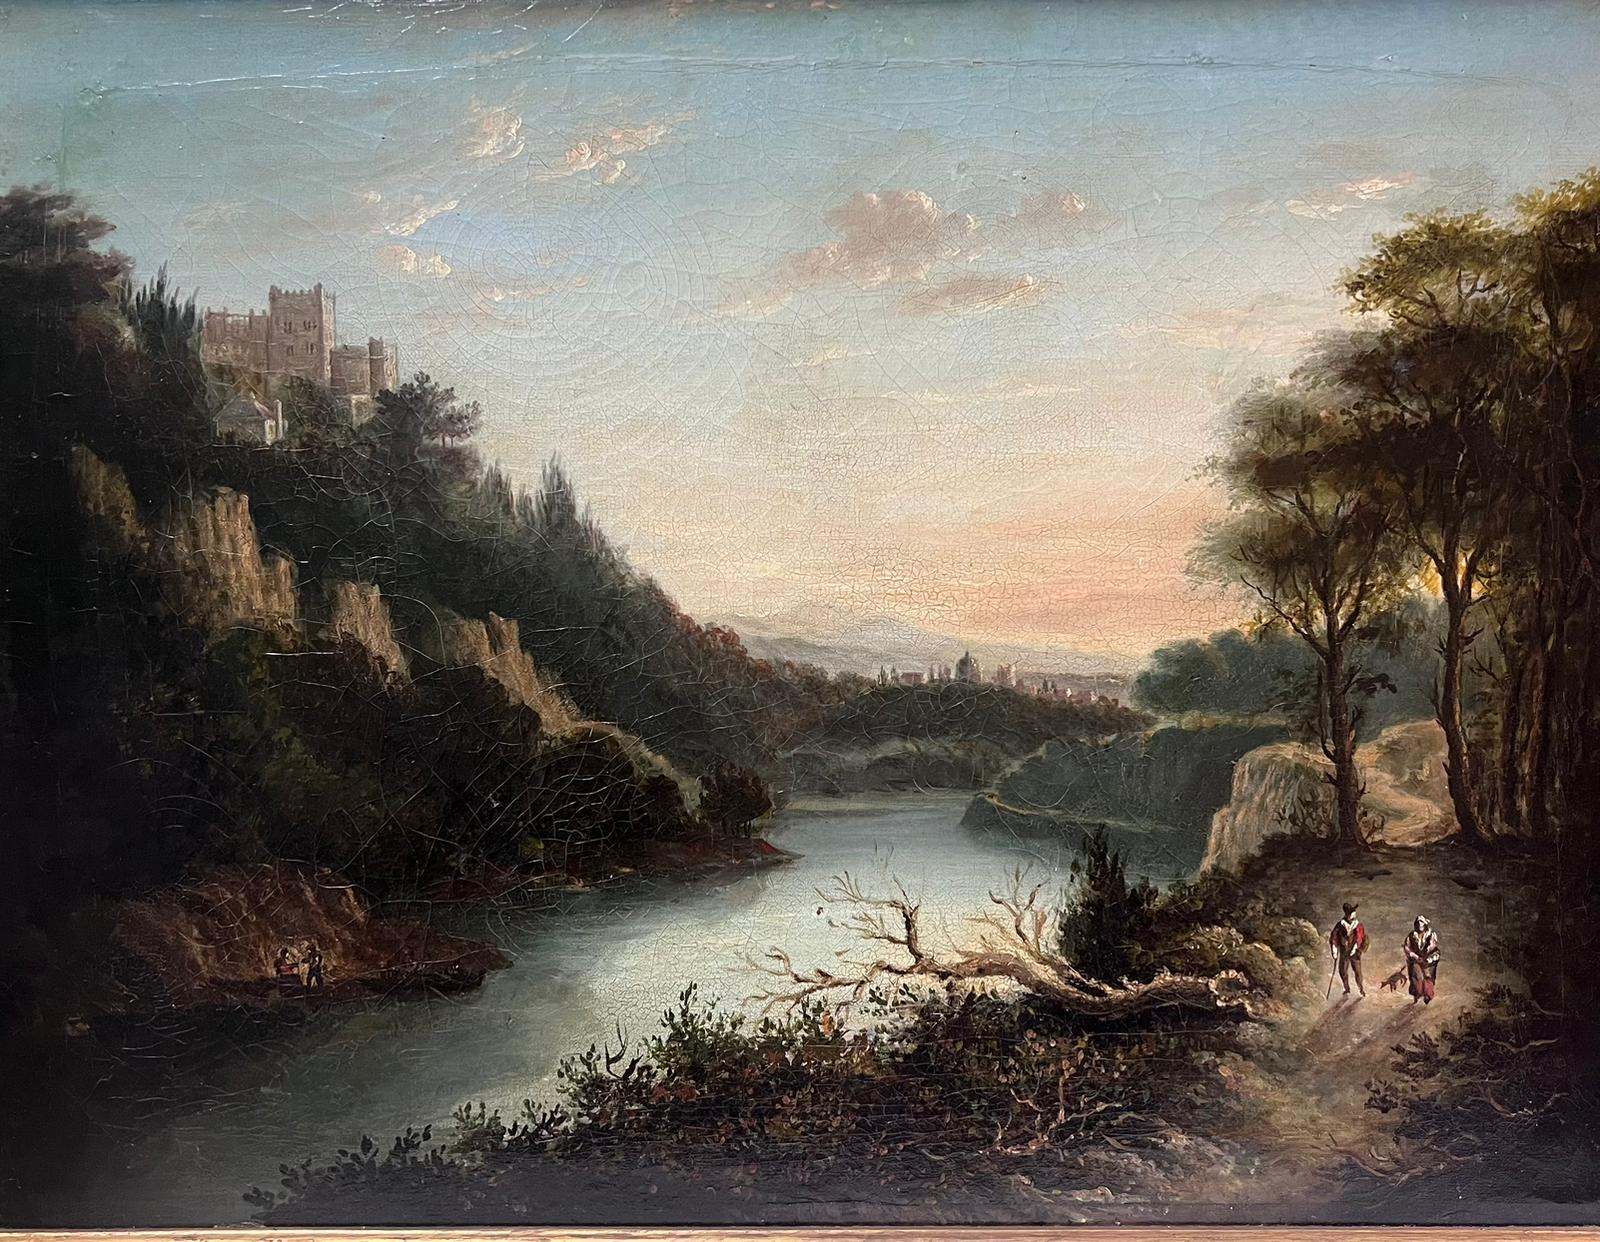 The Castle on the Hill
Scottish artist, early 19th century
oil on canvas, framed
framed: 21 x 27 inches
canvas: 18 x 24 inches
provenance: private collection, UK
condition: very good and sound condition